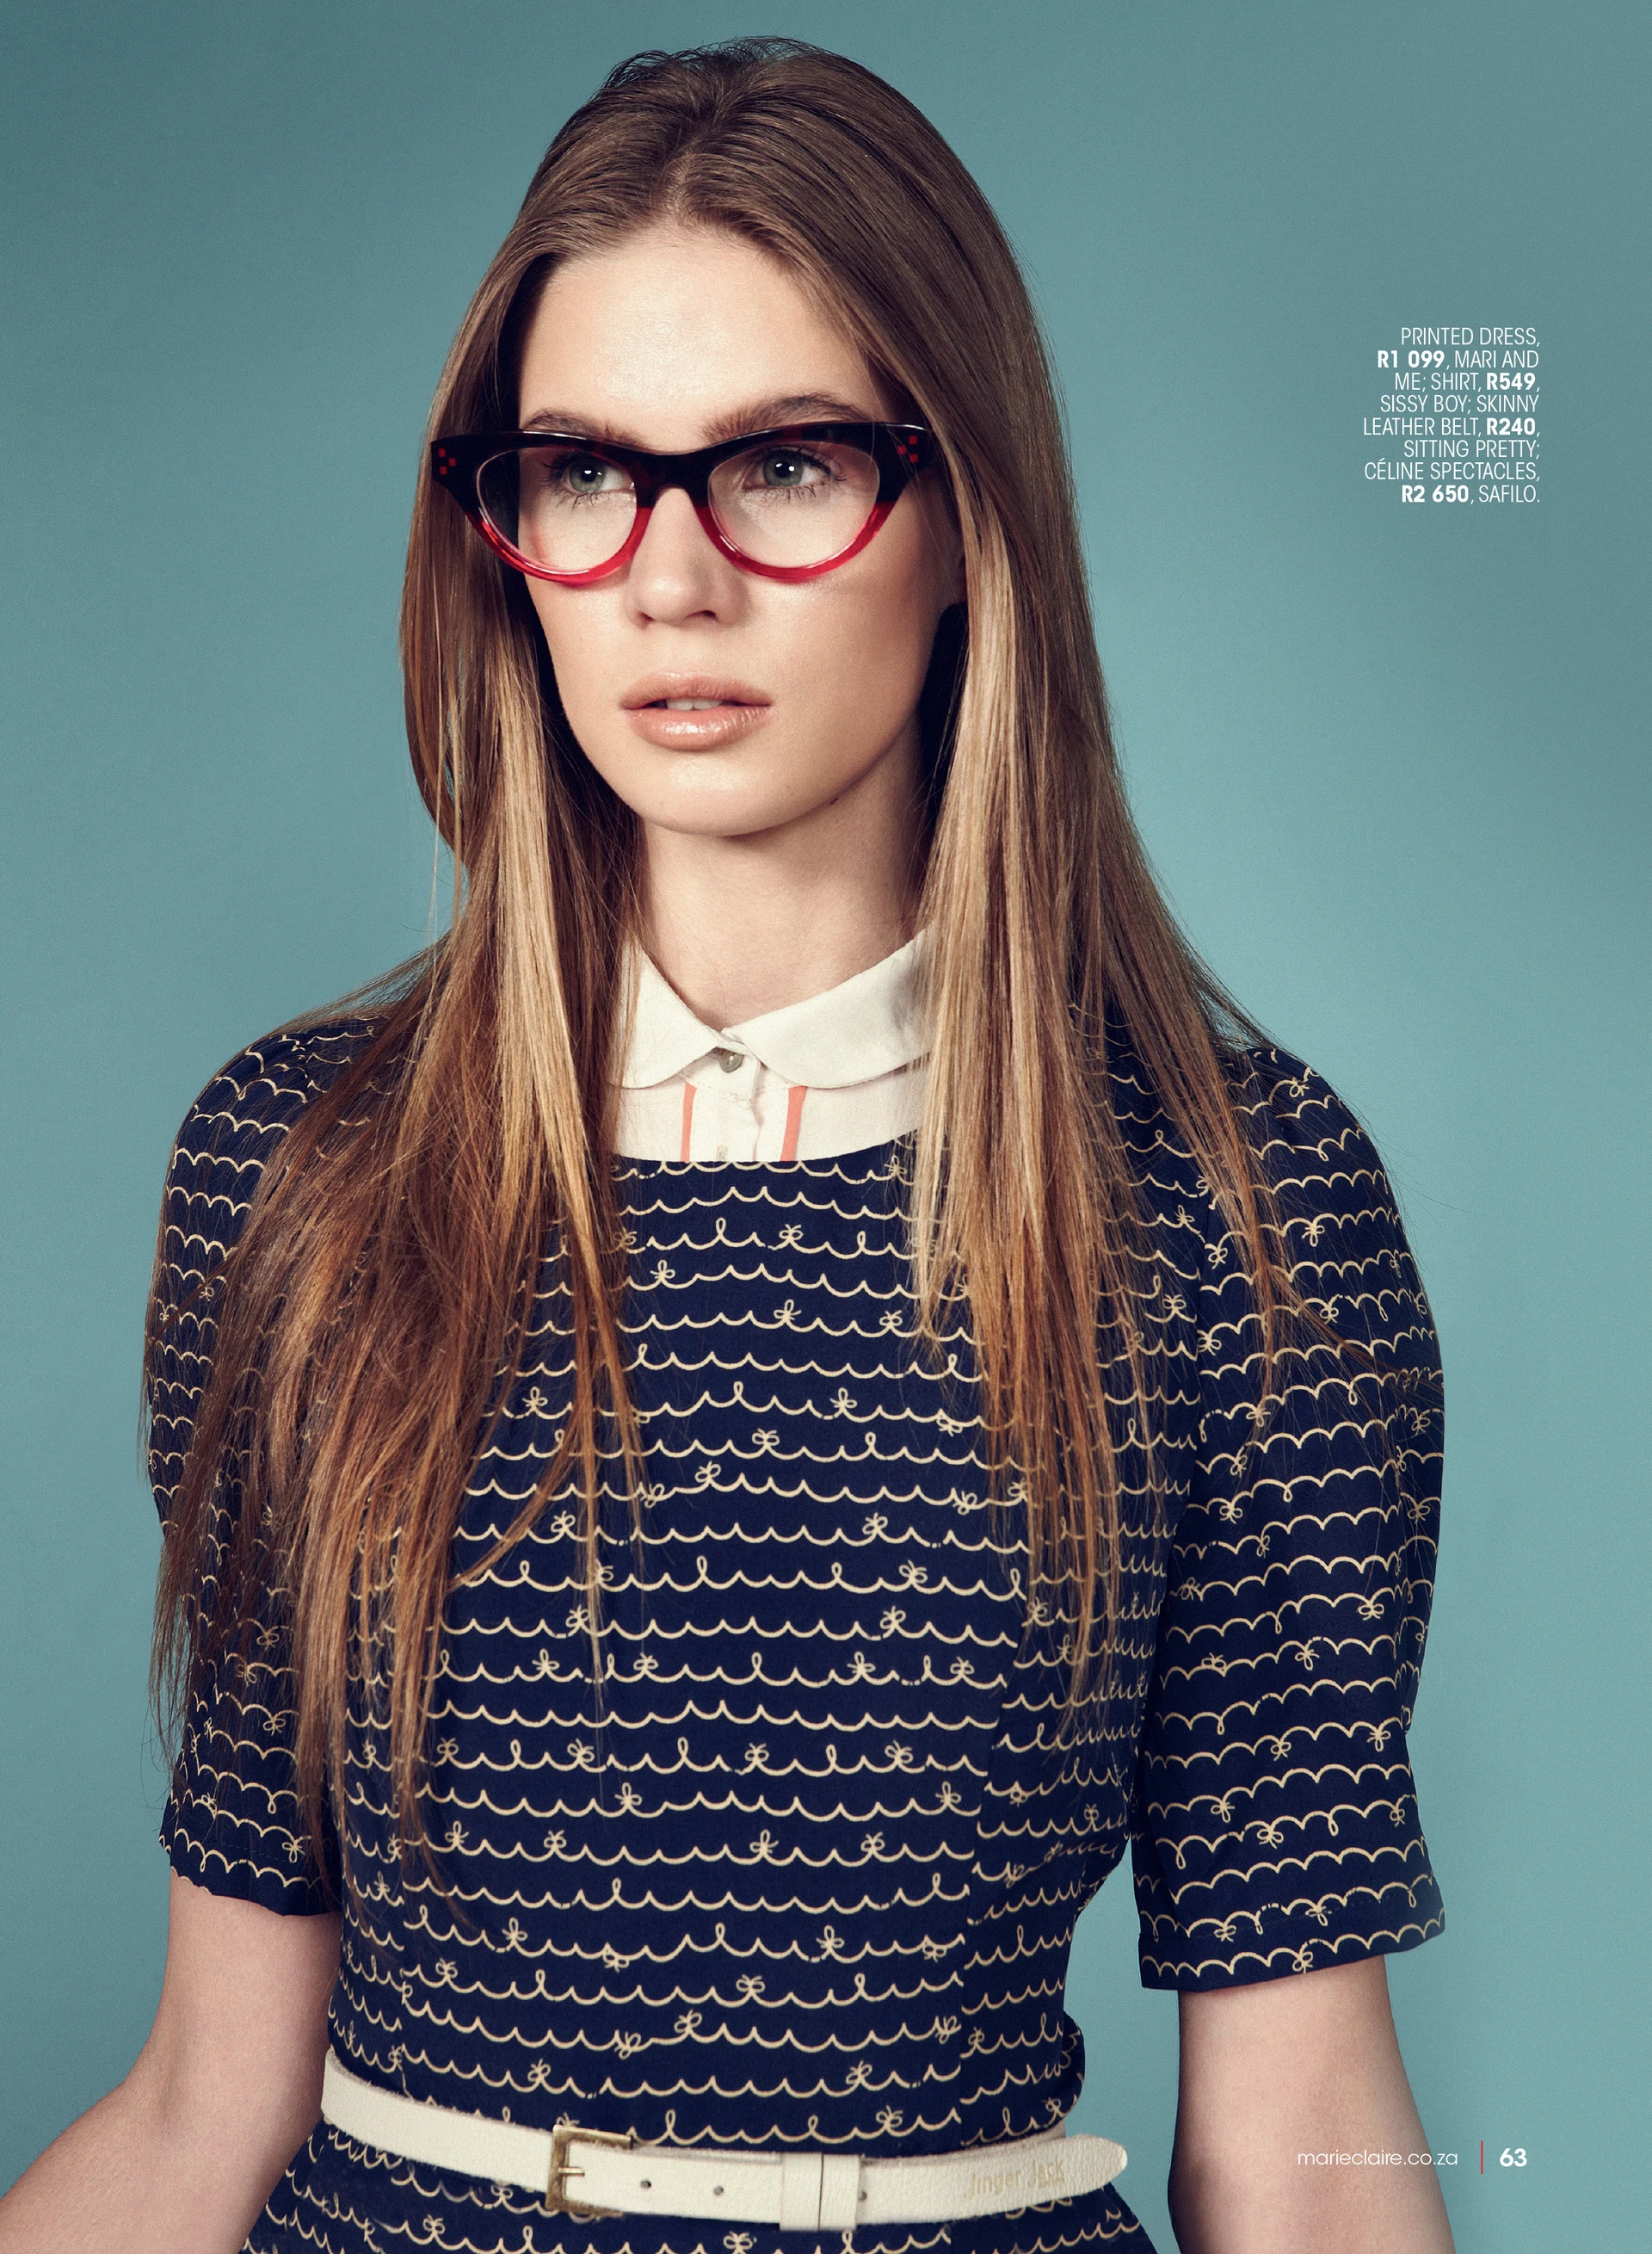 Young woman in a navy printed dress with wave patterns, wearing red-rimmed glasses, accessorized with a white belt, against a teal background. Fashion shoot for Marie Claire.